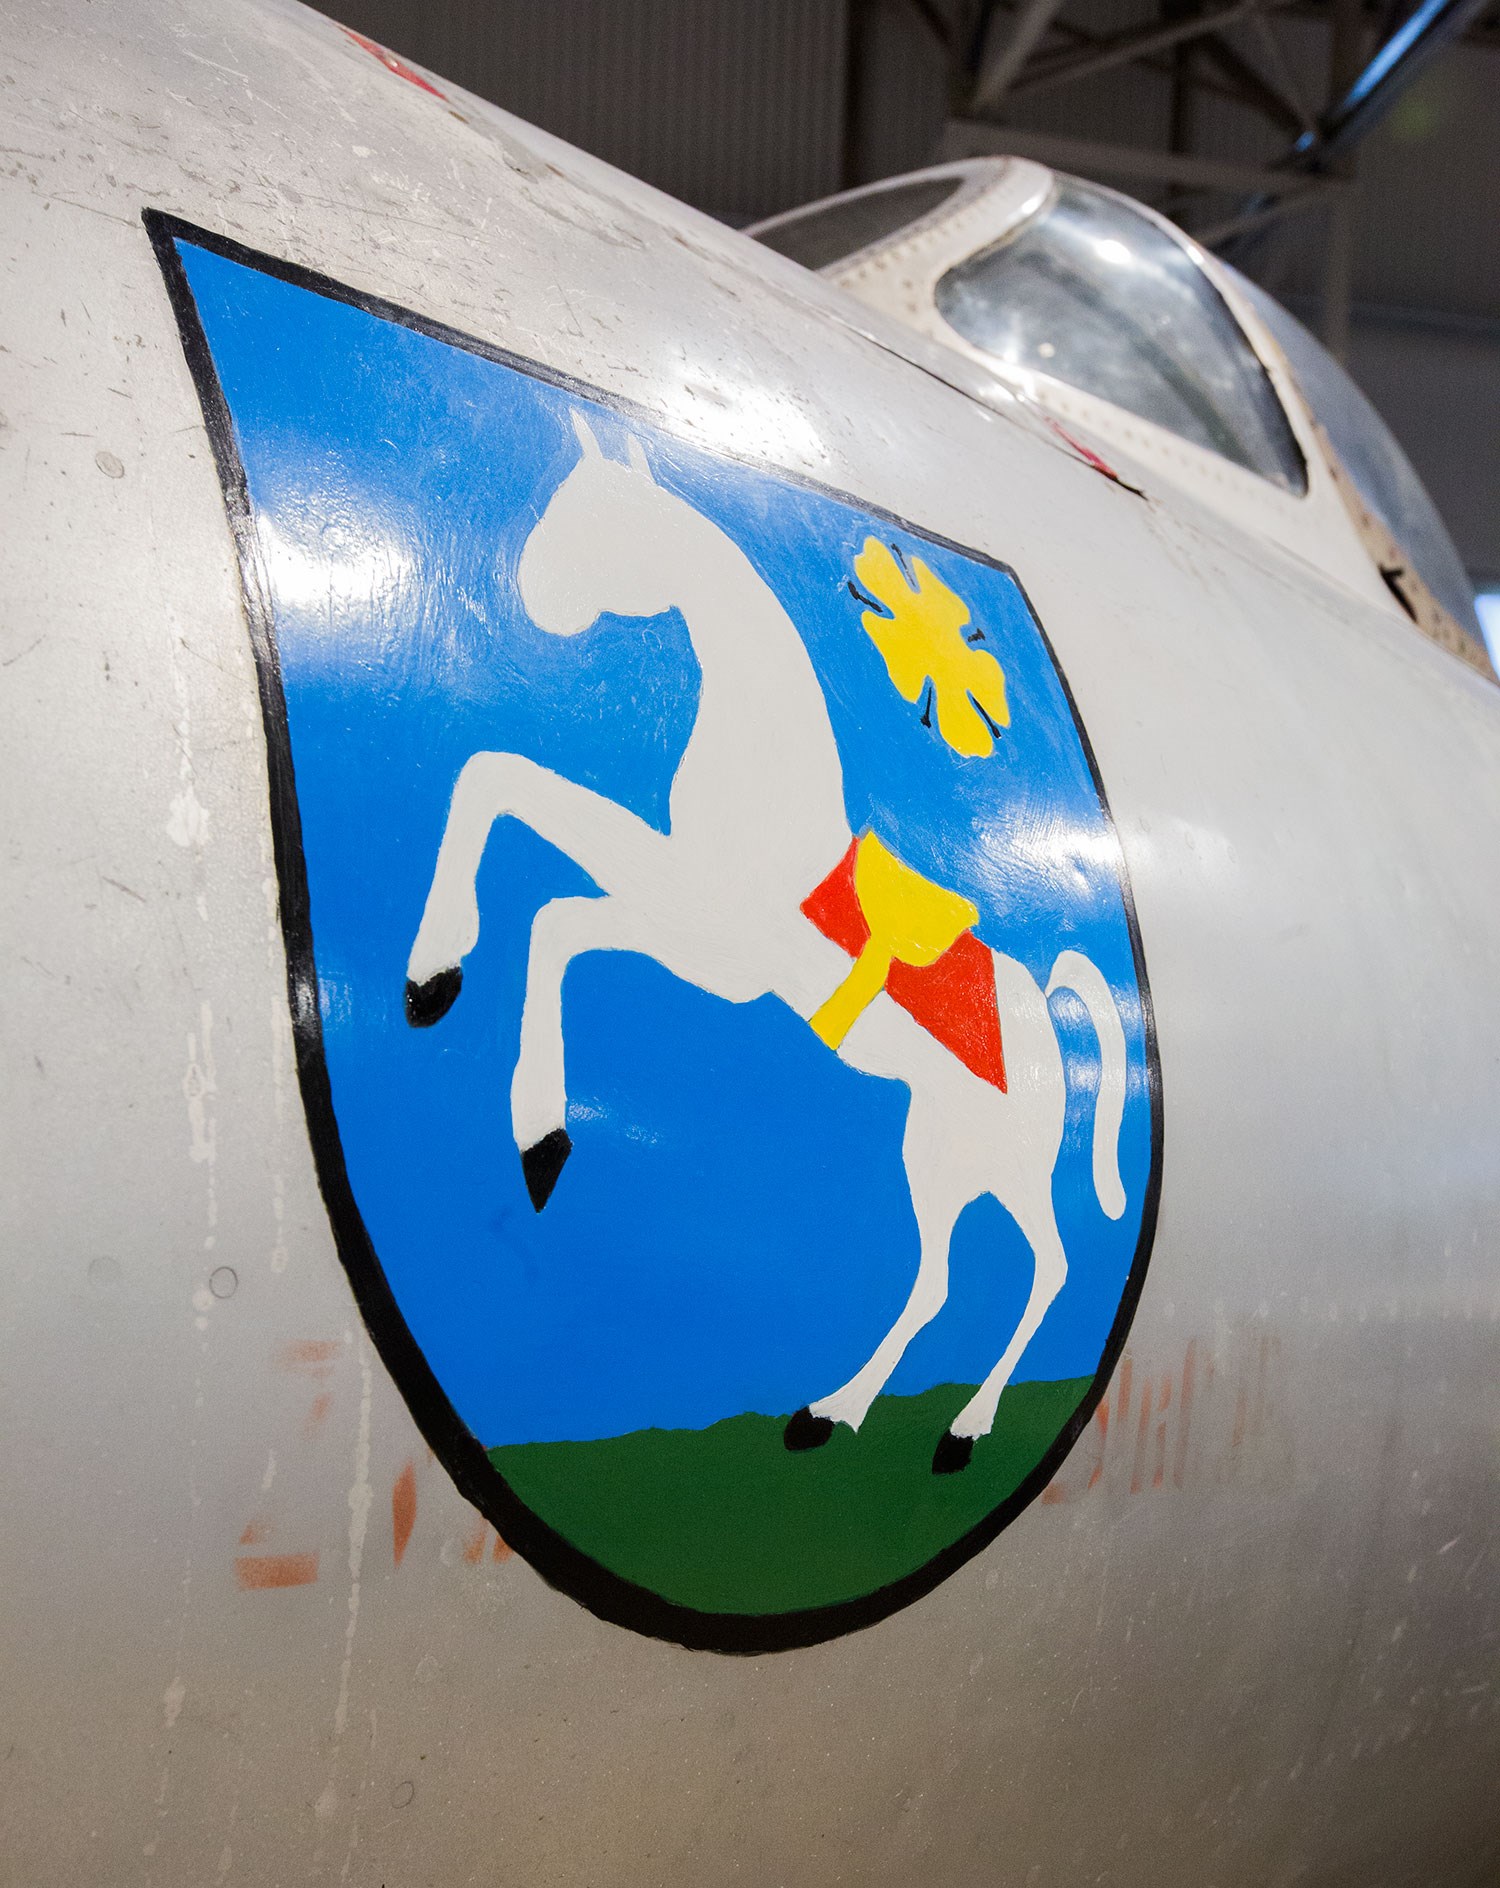 Crest of the city of Ostrava painted on the nose of the Aero S-103 aircraft. The crest has a blue background with a white horse and yellow flower.